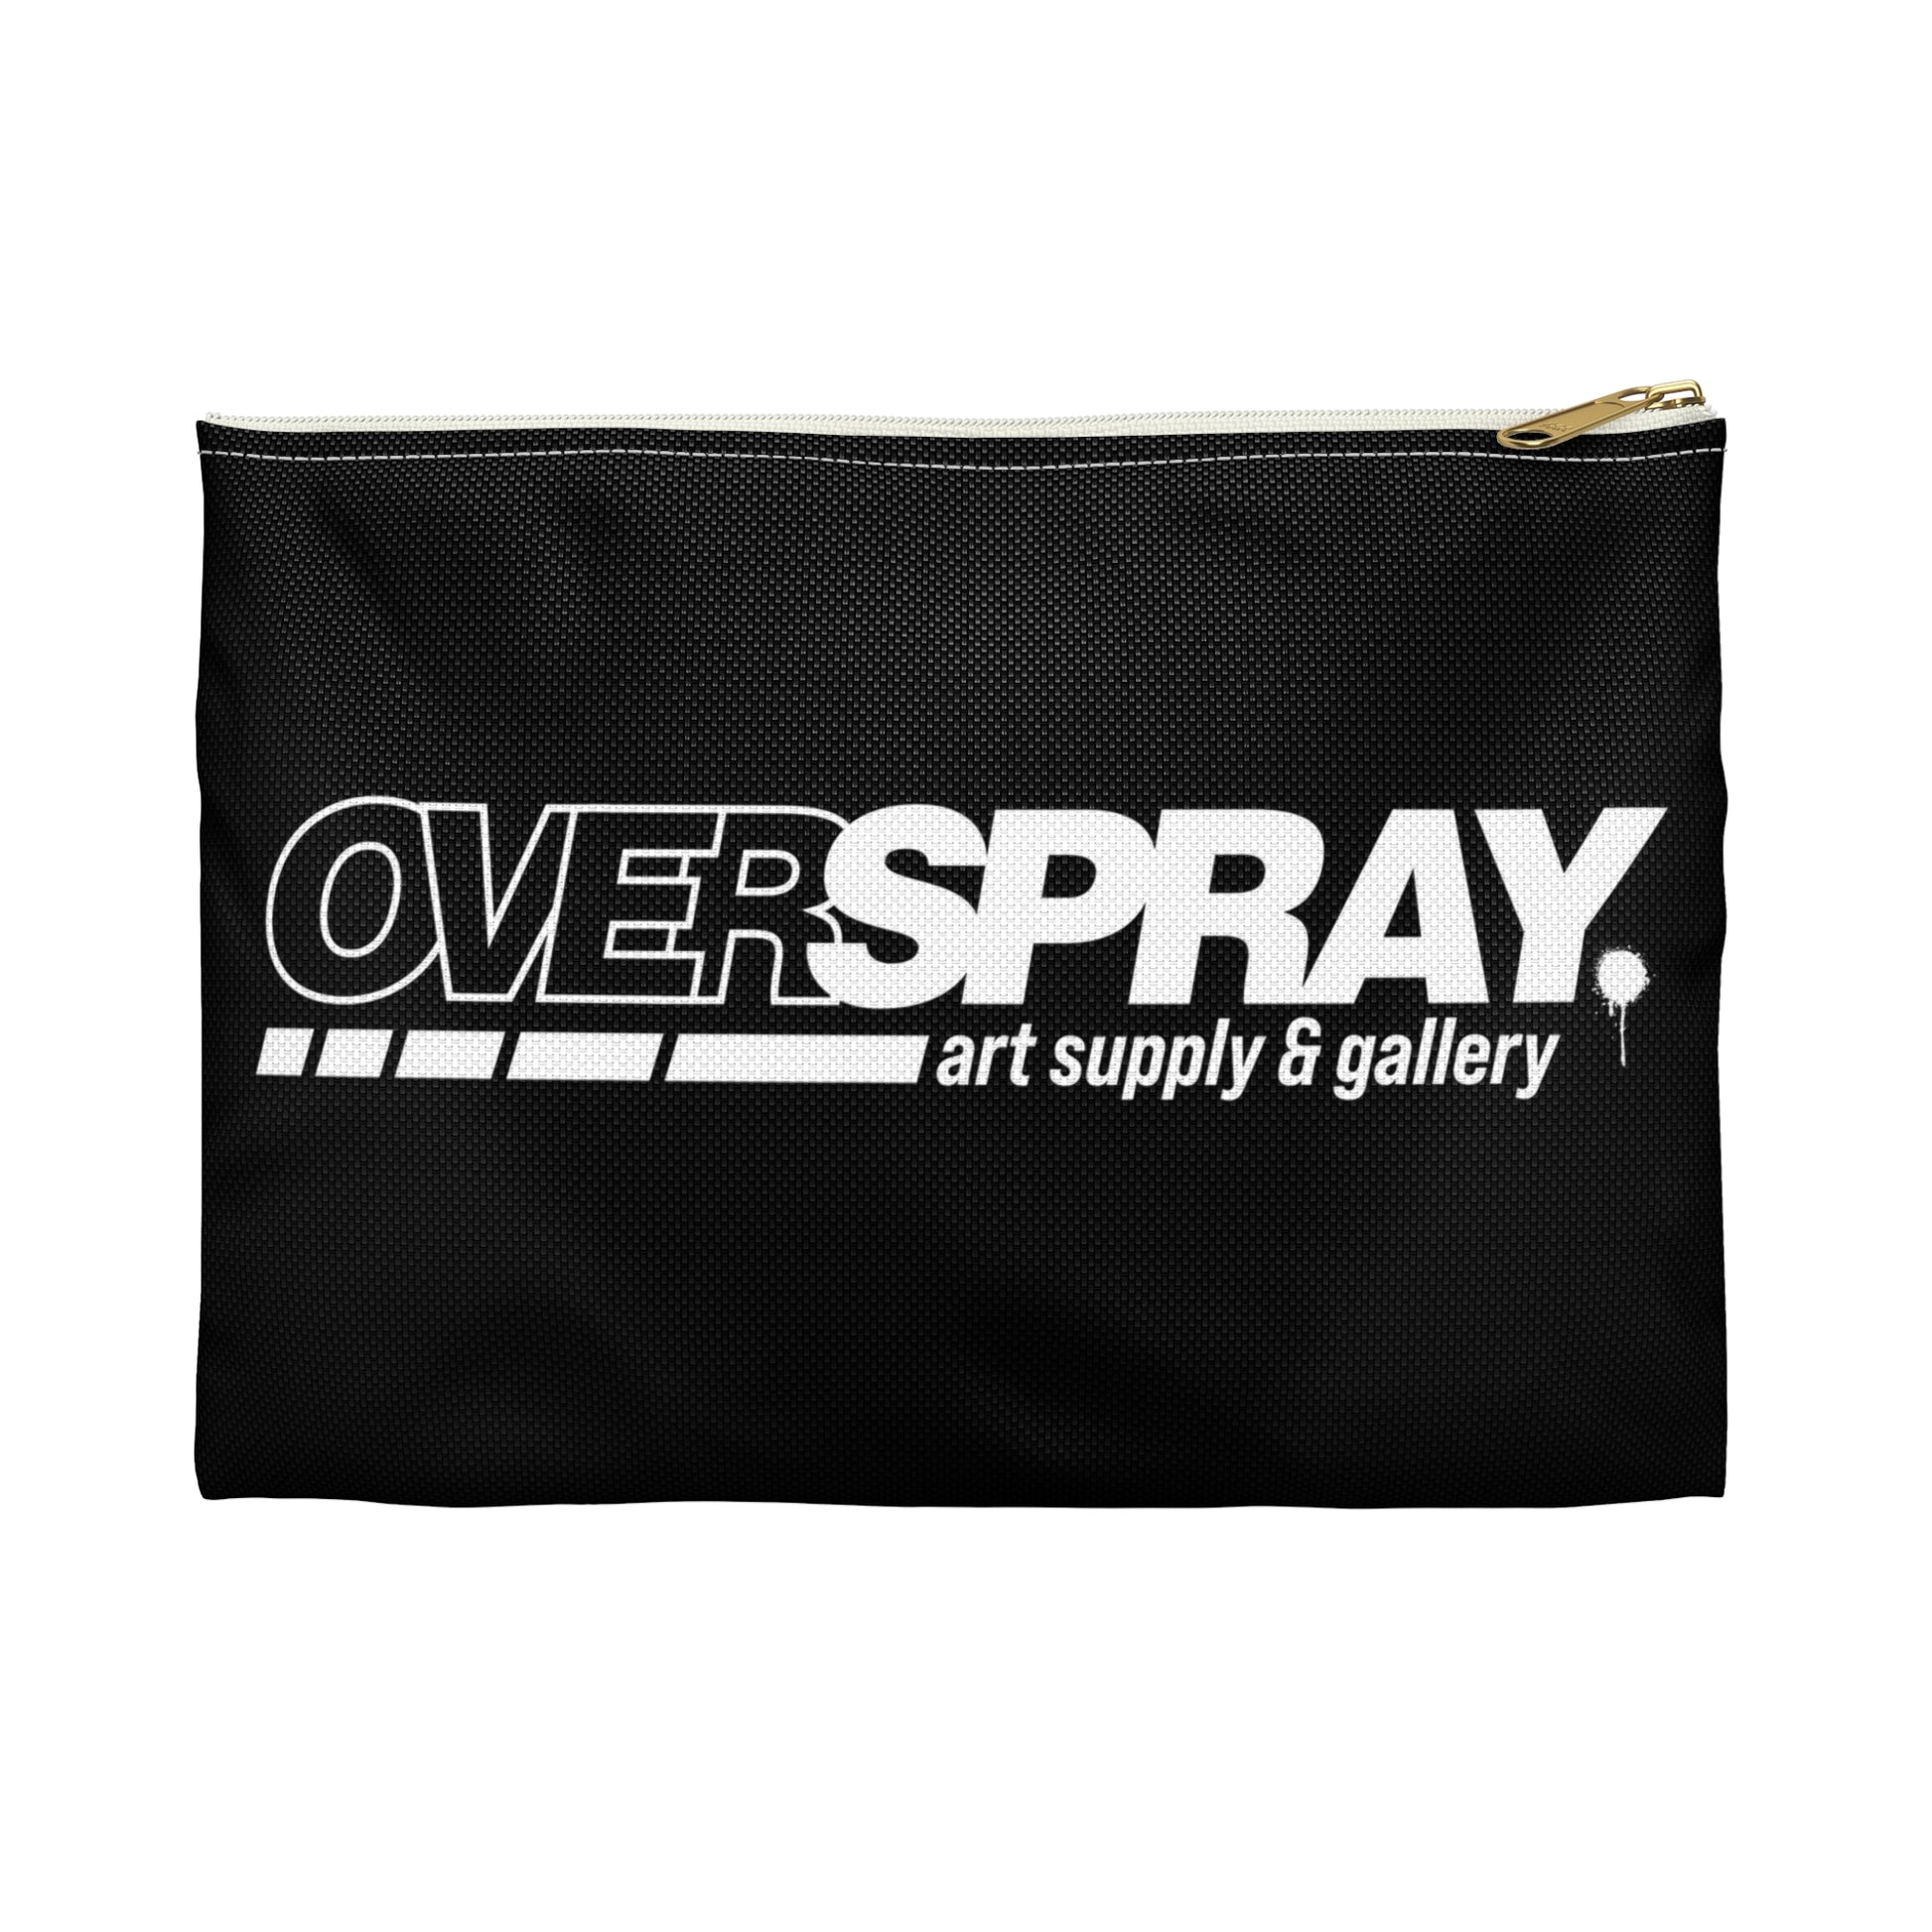 Black pencil bag with a silver zipper, reads "Overspray Art Supply & Gallery" in white